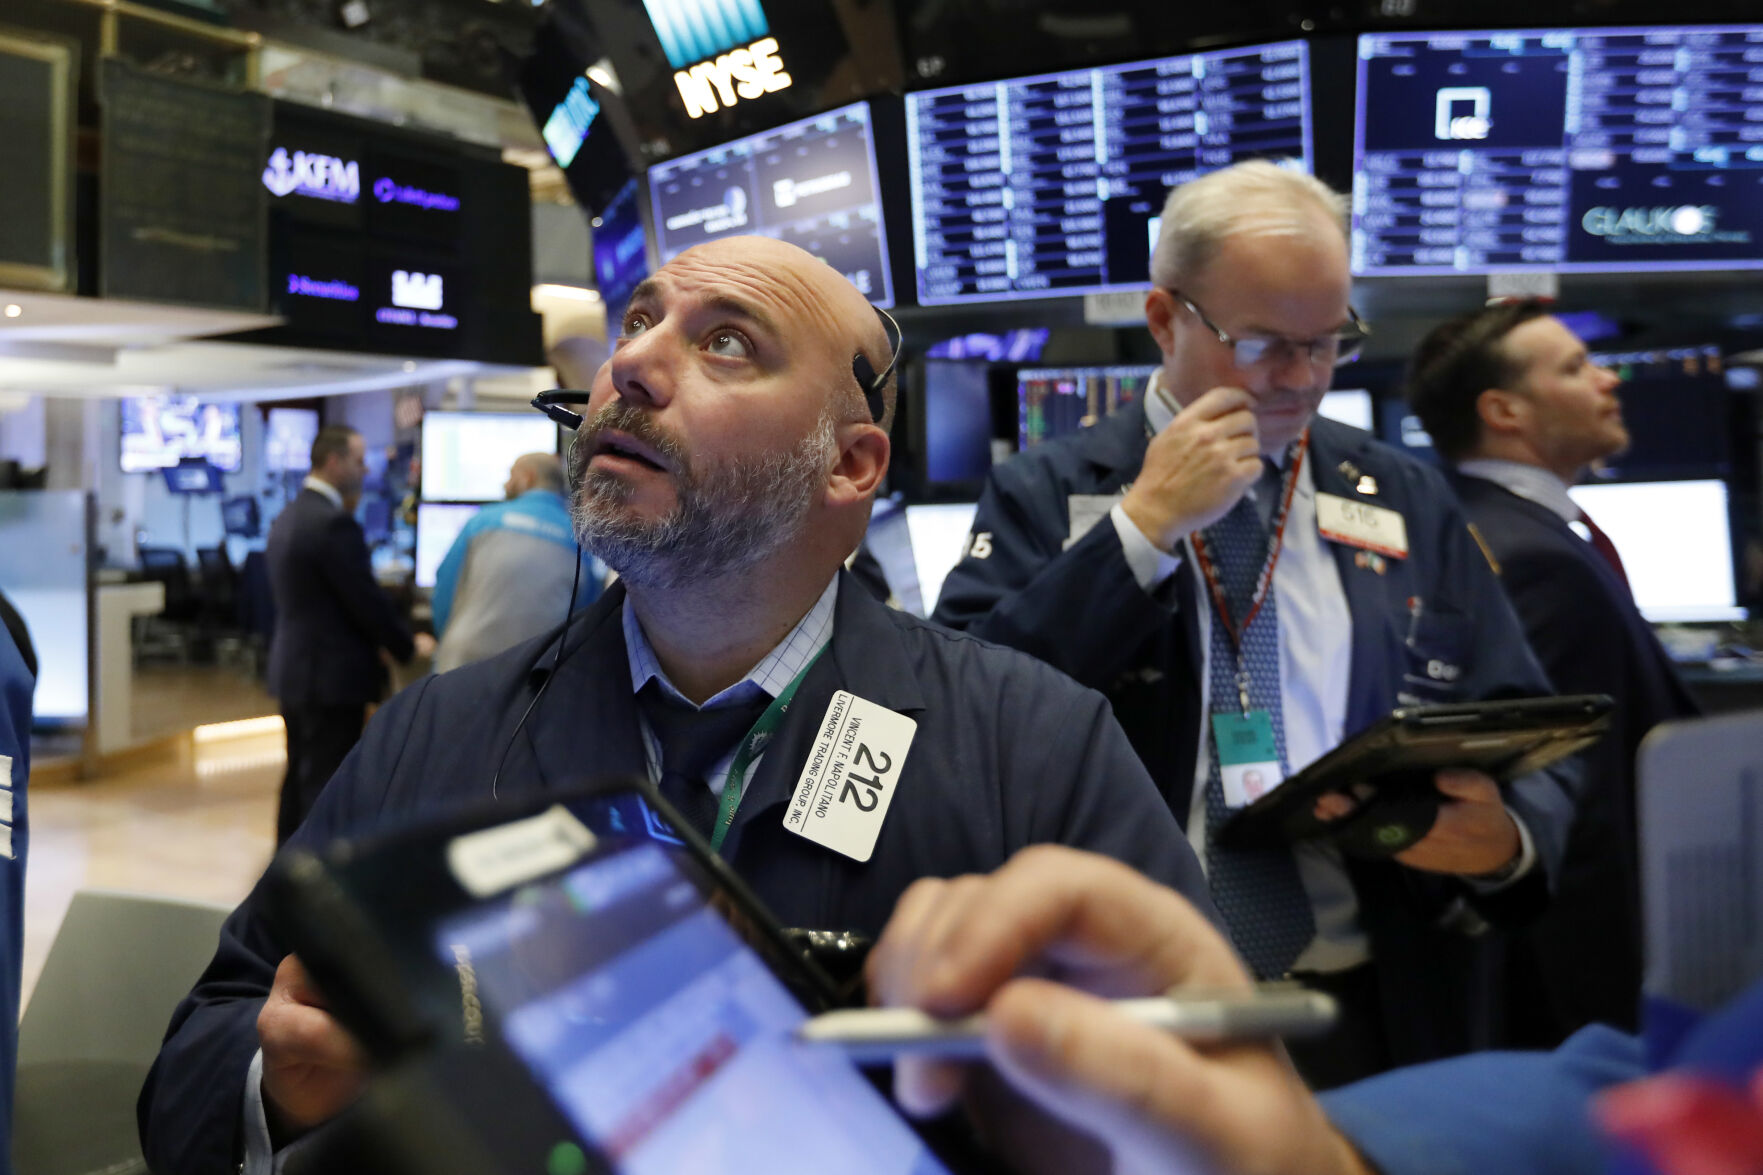 Stocks are opening lower on Wall Street, with energy companies logging some of the biggest losses as oil prices take another turn lower. The S&P 500 index was off 0.2% in the first few minutes of trading Monday and the Nasdaq was down by a similar amount.    PHOTO CREDIT: Richard Drew
The Associated Press